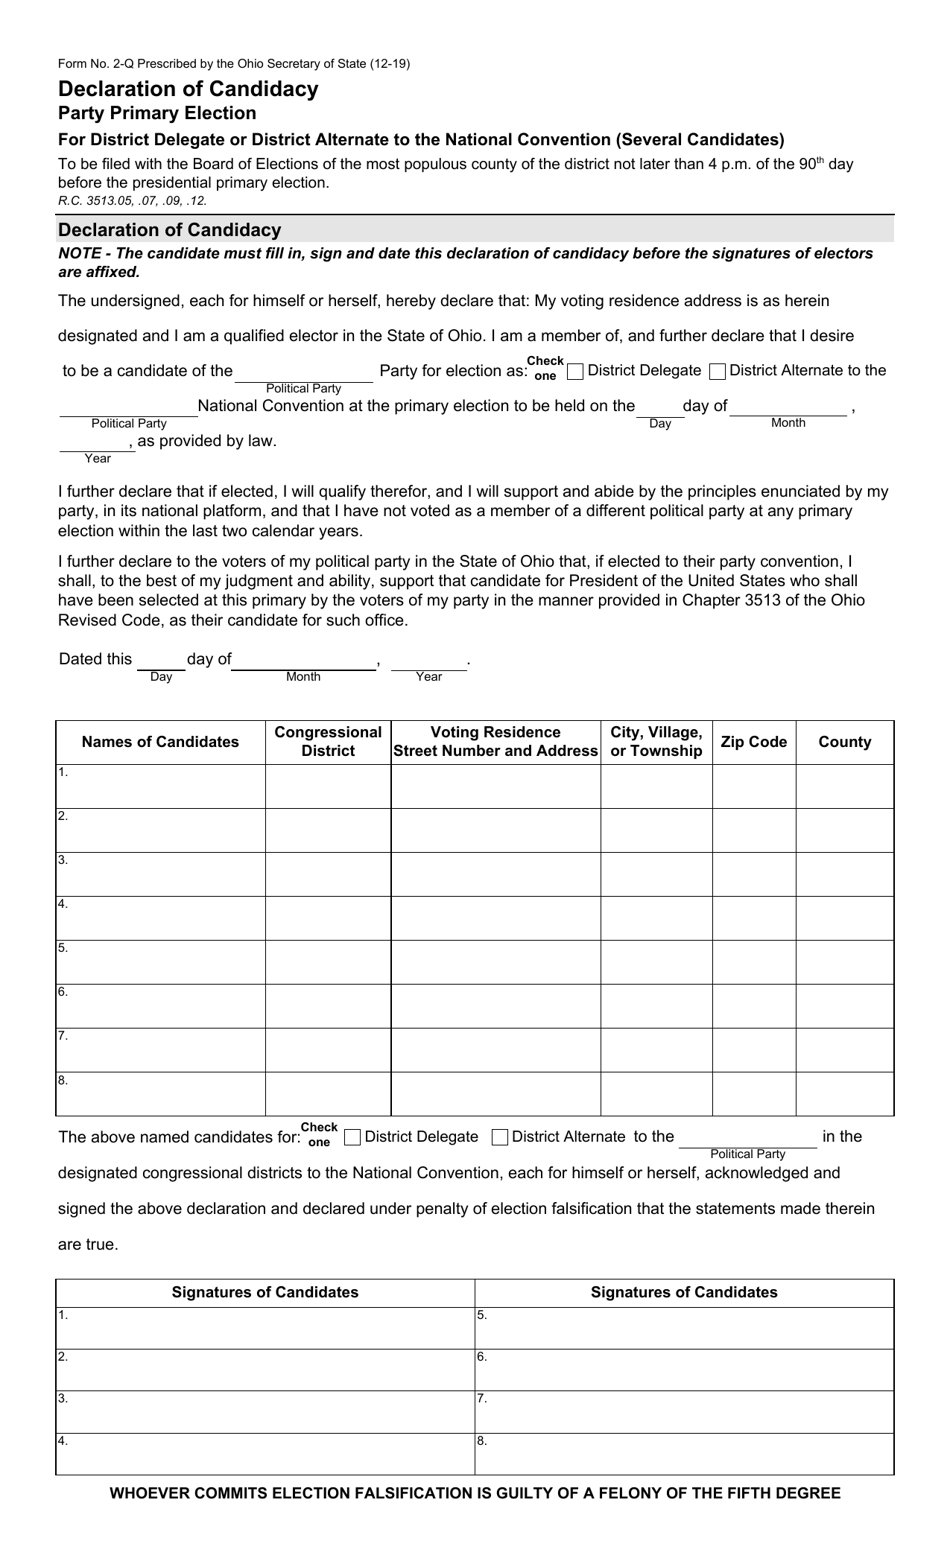 Form 2-Q Declaration of Candidacy - Party Primary - District Delegate / Alternate to the National Convention (Several Candidates) (Traditional) - Ohio, Page 1